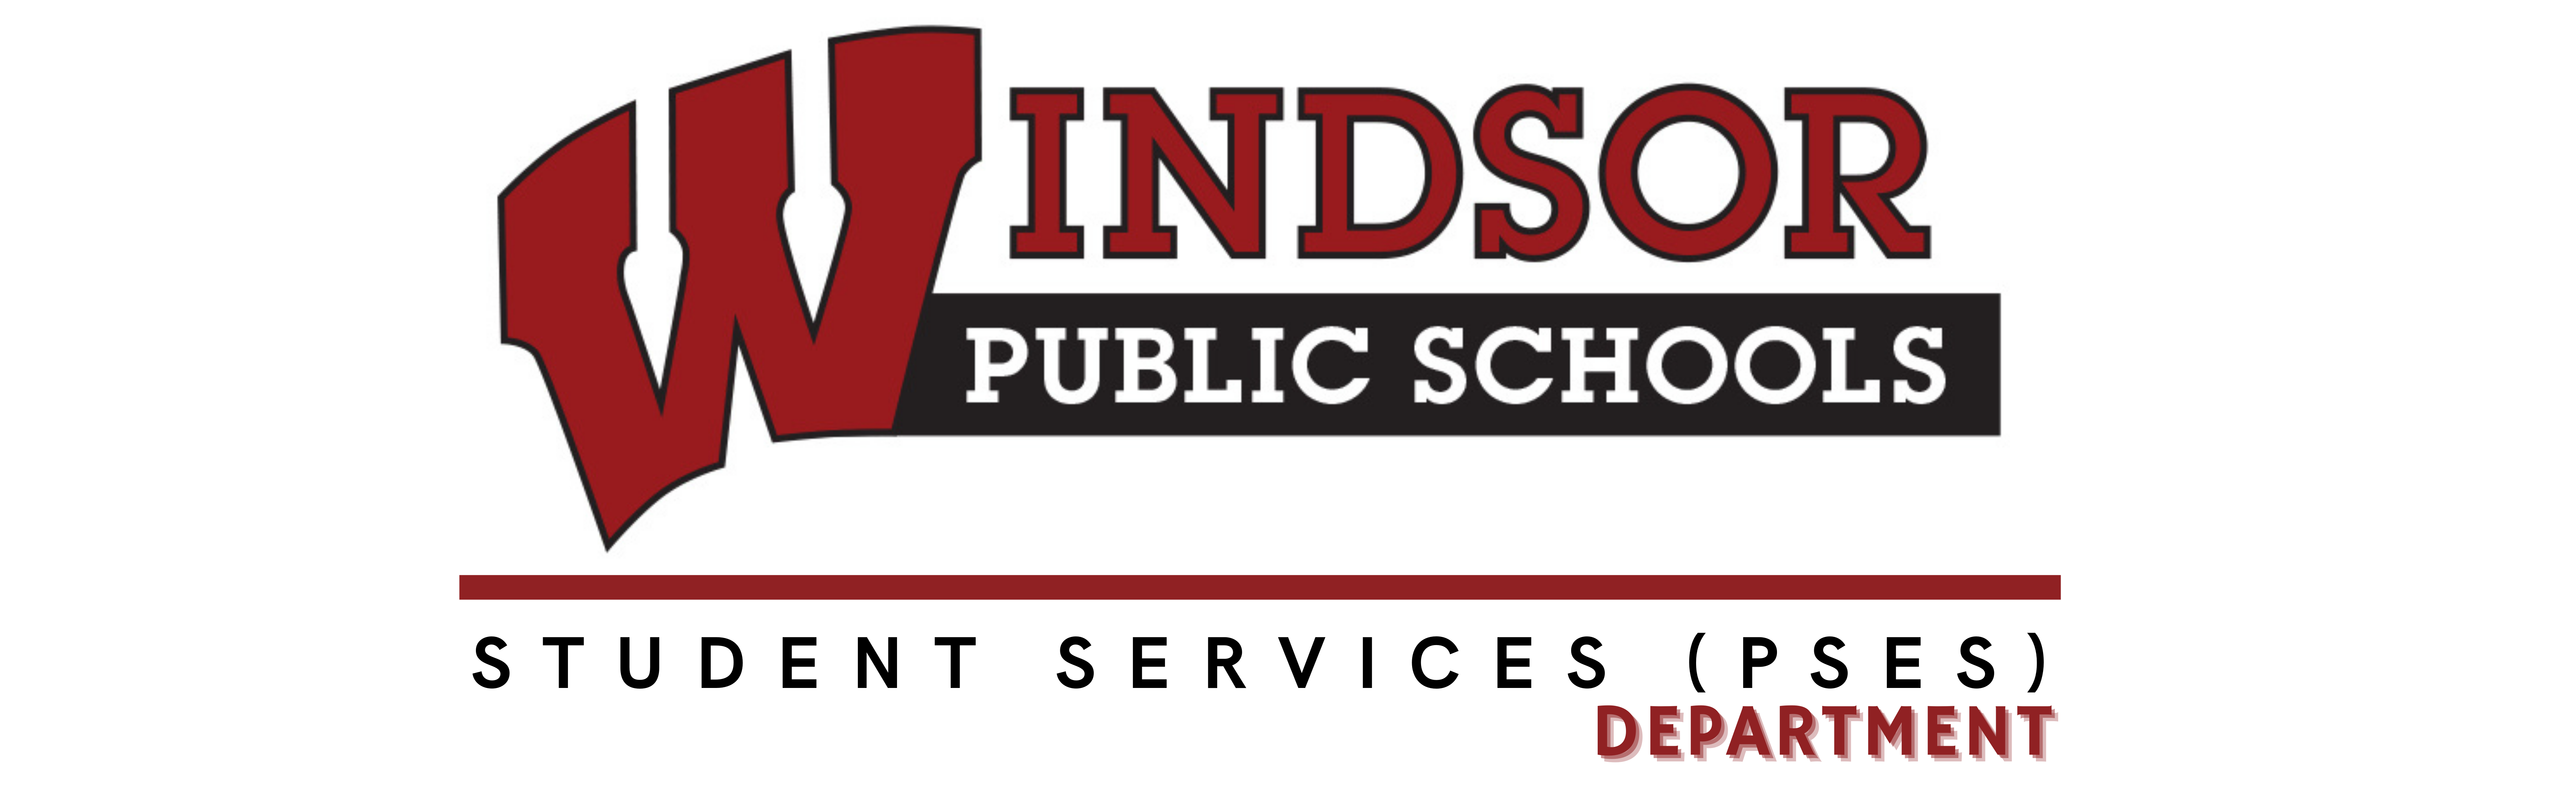 windsor public schools logo student services/ pupil and special education services